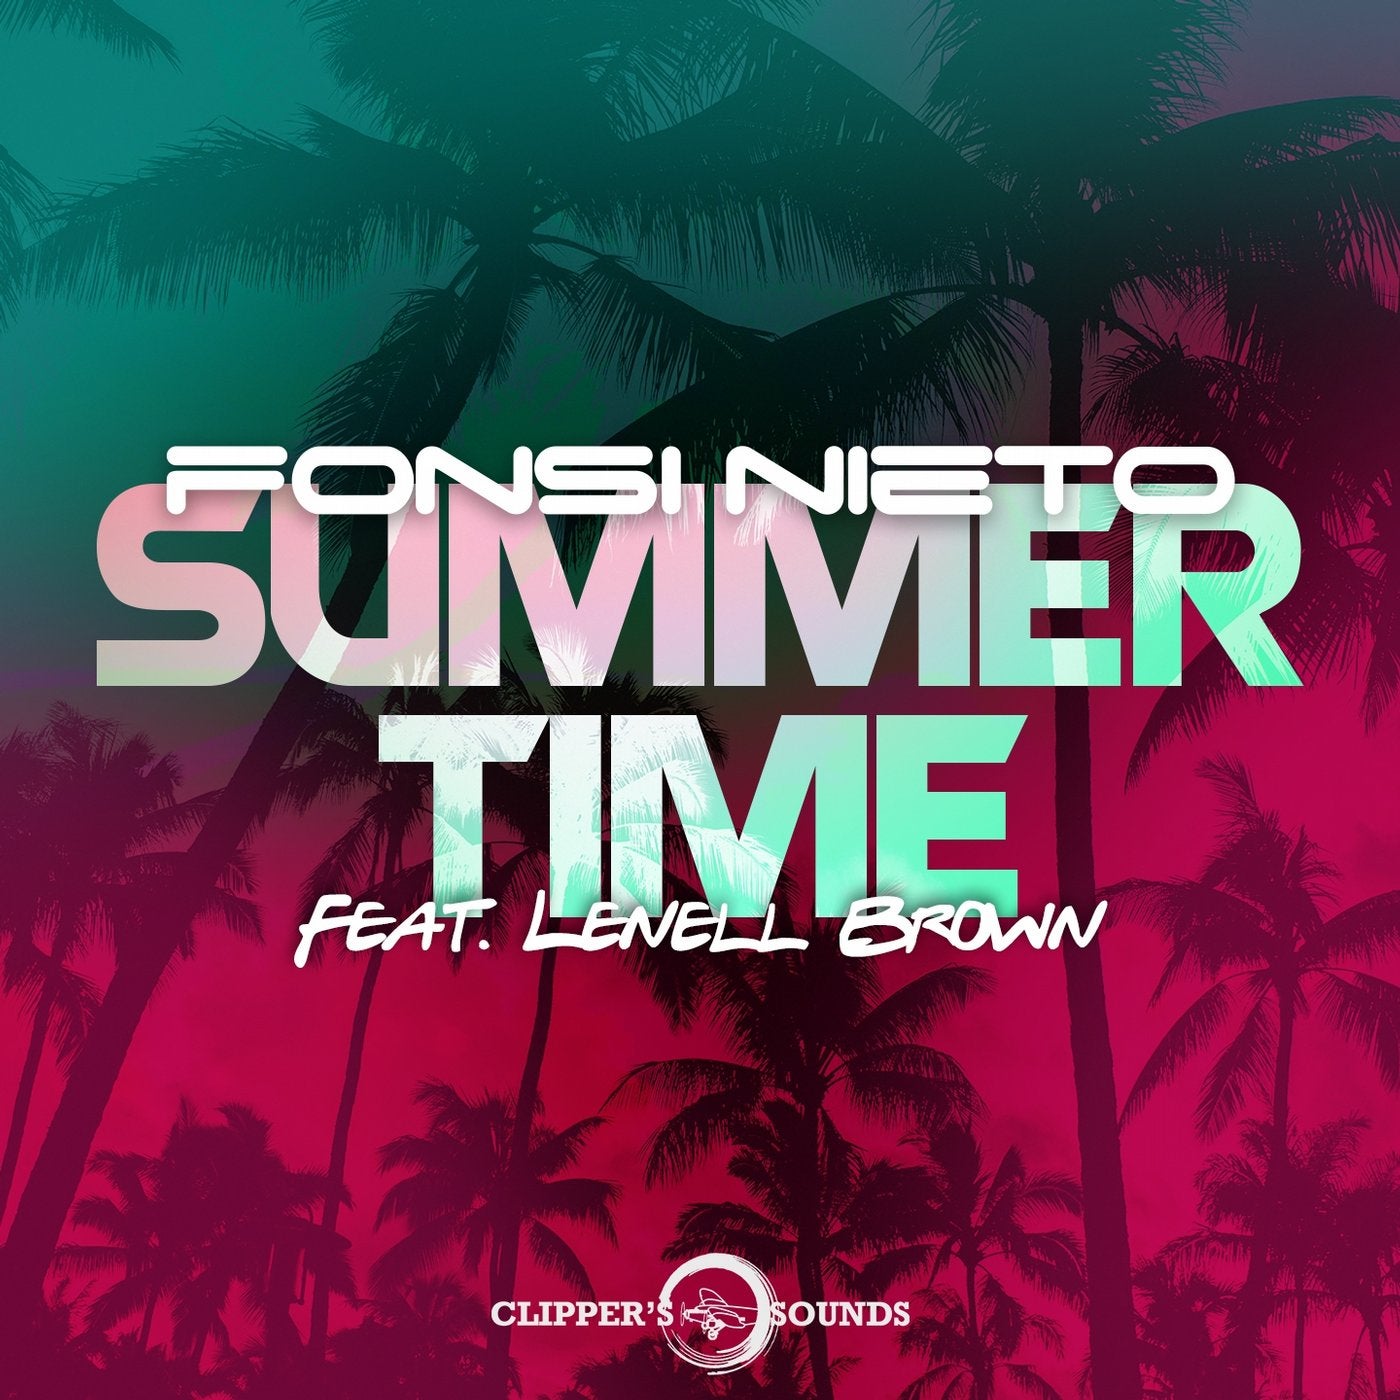 Summertime (feat. Lenell Brown)